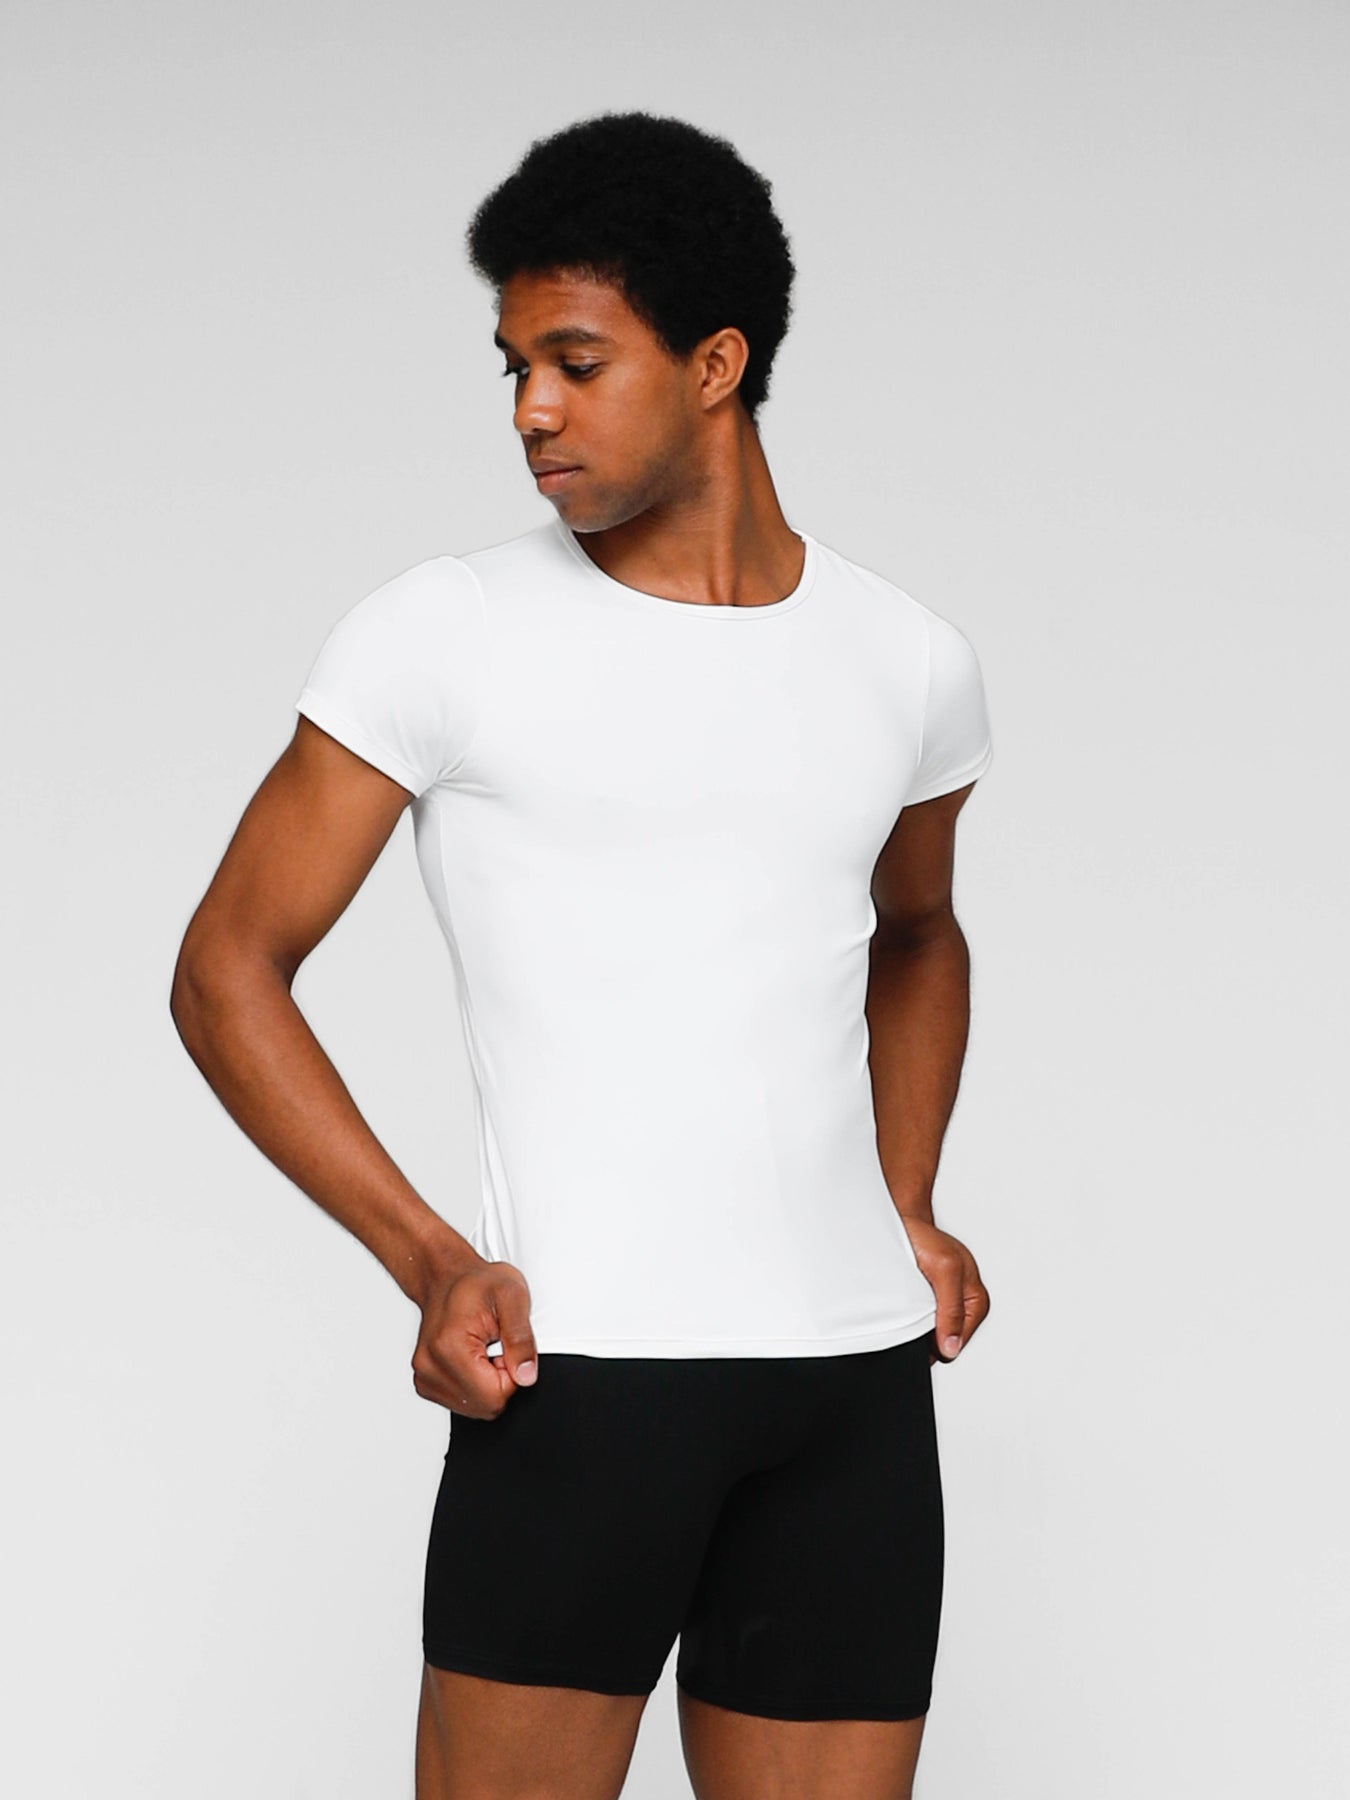 ProWEAR Fitted Short Sleeve Shirt - Adult